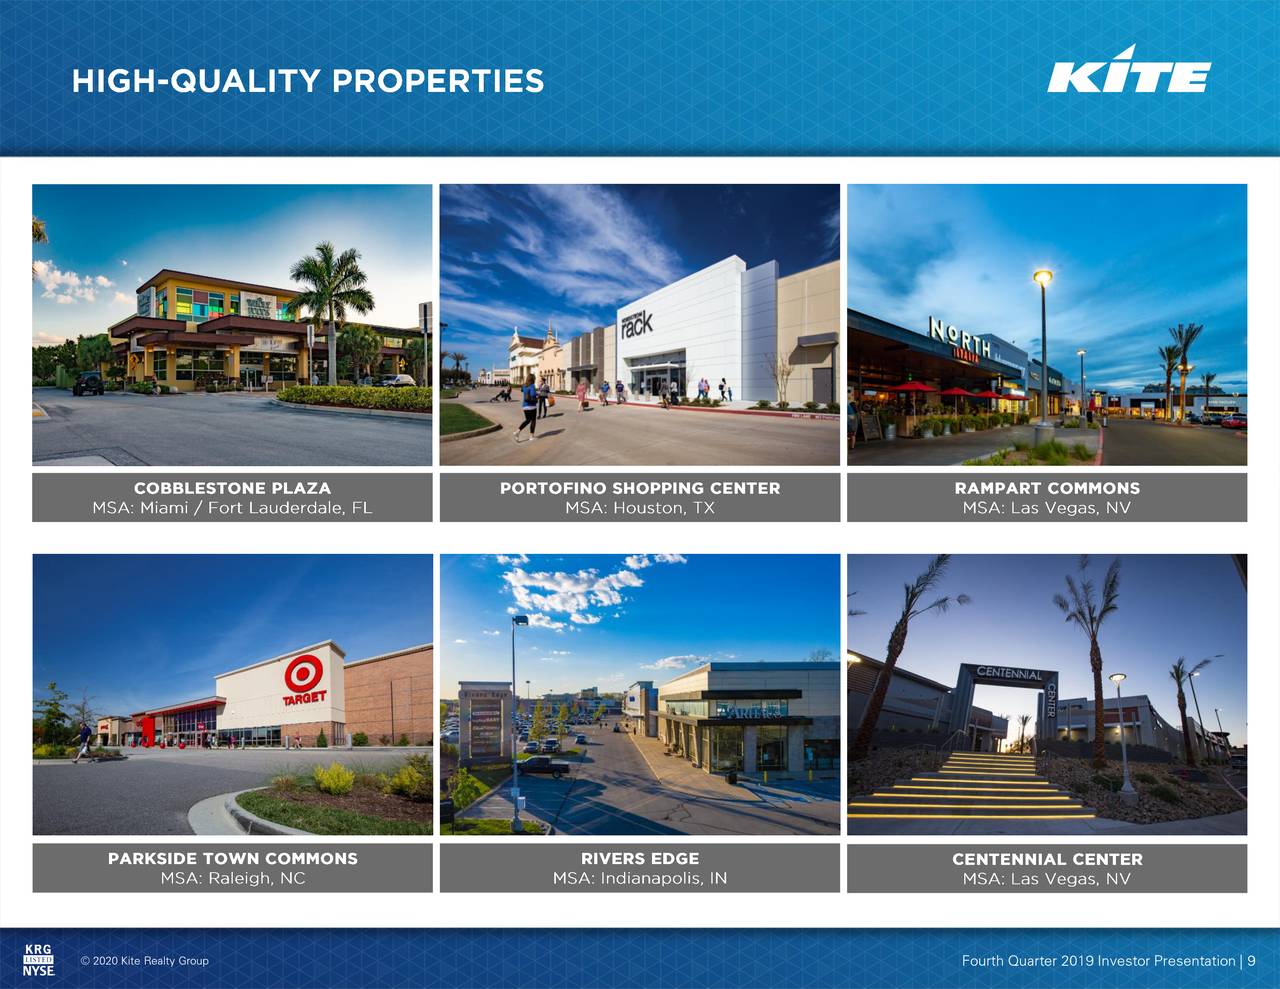 kite realty group trust